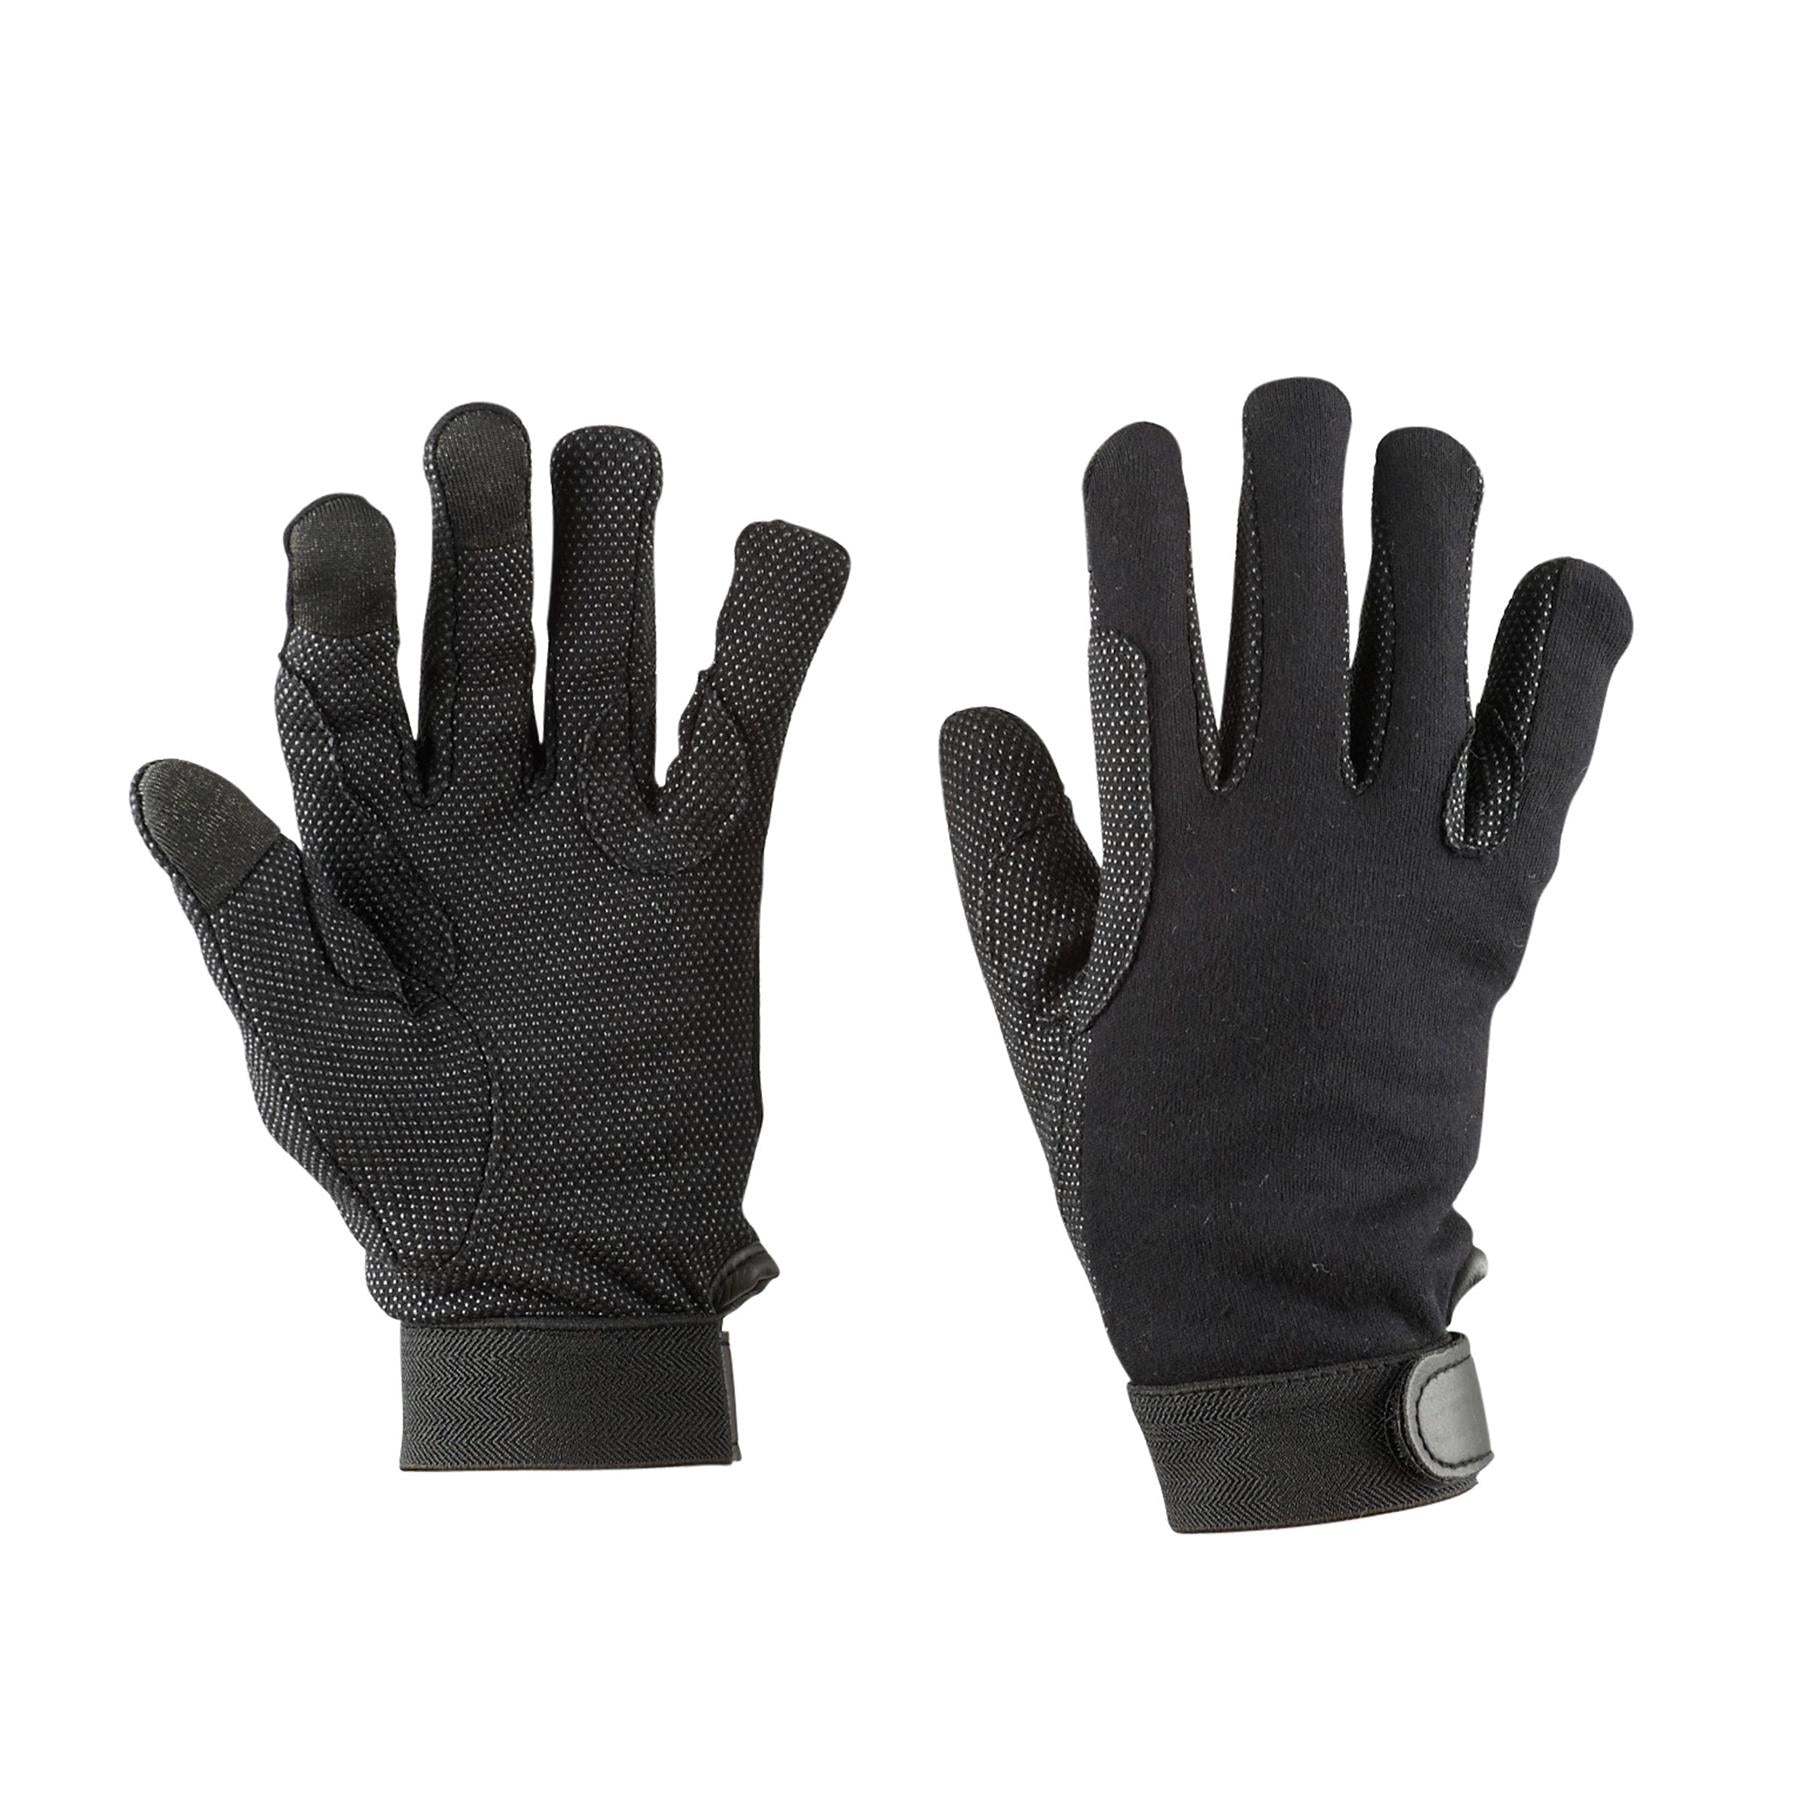 Dublin Winter Thinsulate Track Horse Riding Gloves - Just Horse Riders